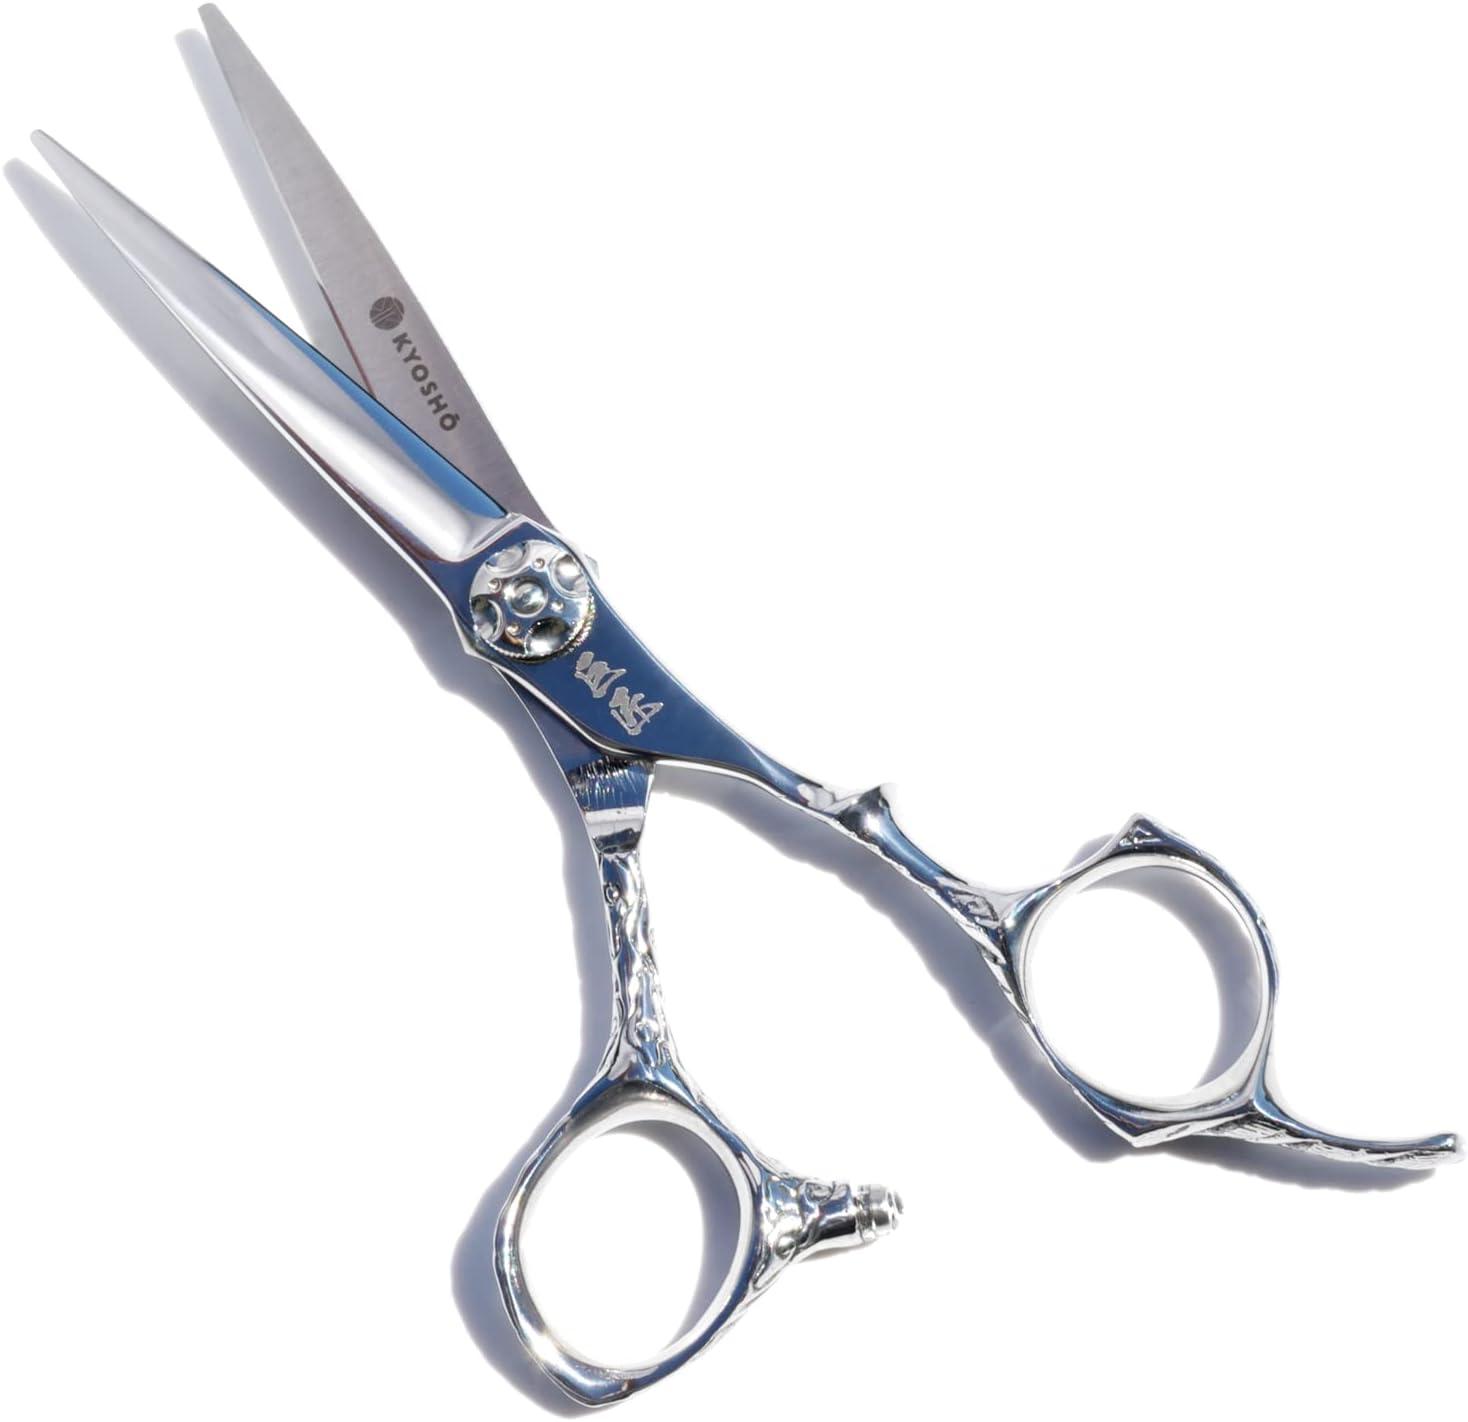 best japanese shears available